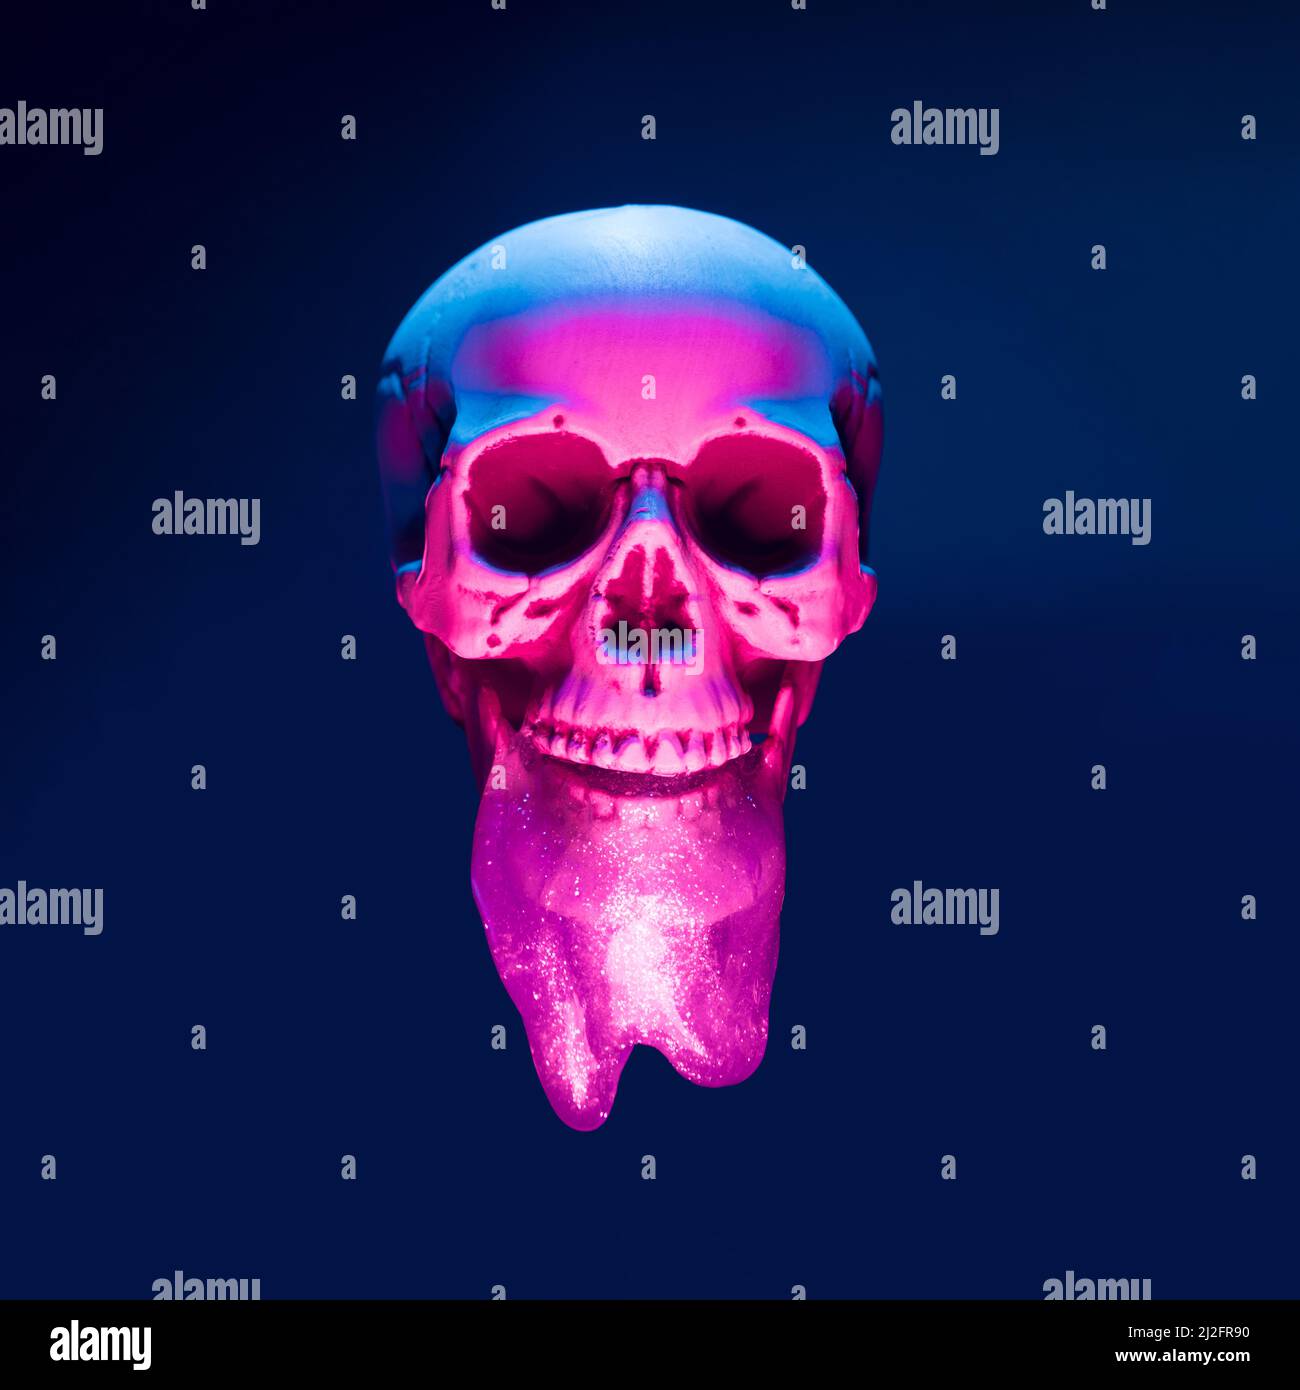 Skull with neon lights and slime floating over the black background. Cyber death concept. Stock Photo